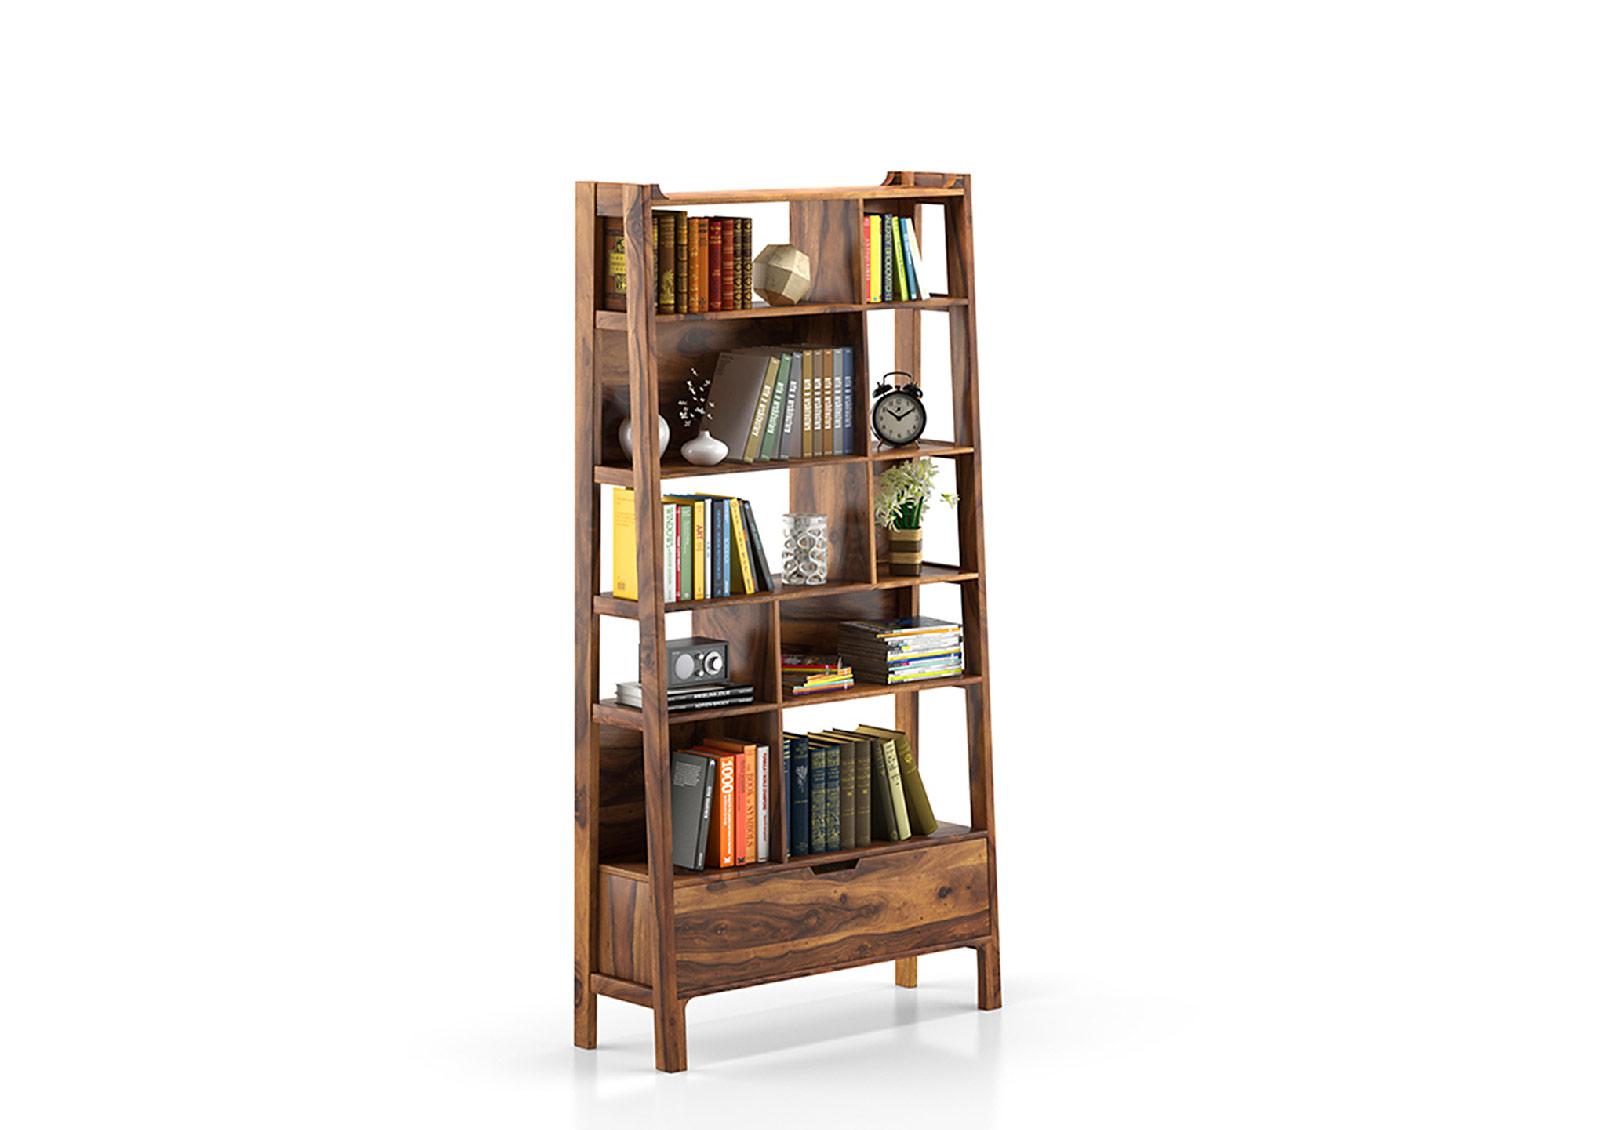 Wooden Bookshelf Design Ideas For Your Living Room - Beautiful Homes